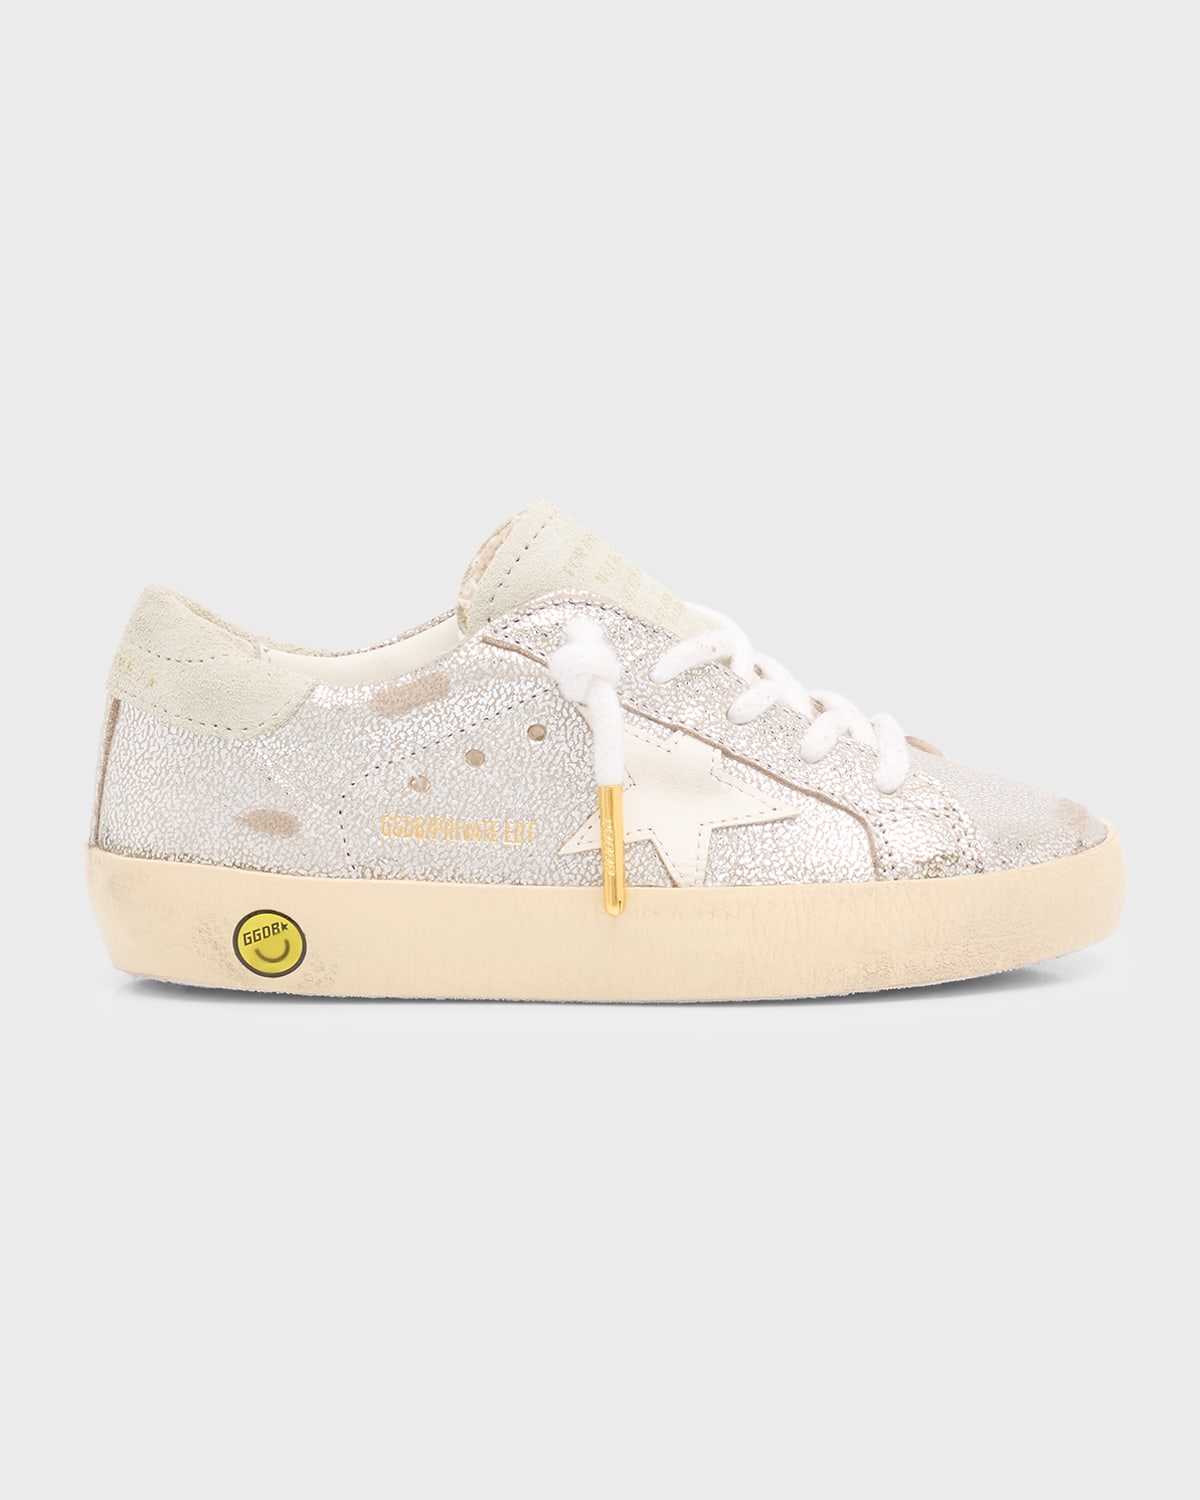 Golden Goose Girl's Superstar Lace Up Micro Crackle Trainers, Kids In Silver White